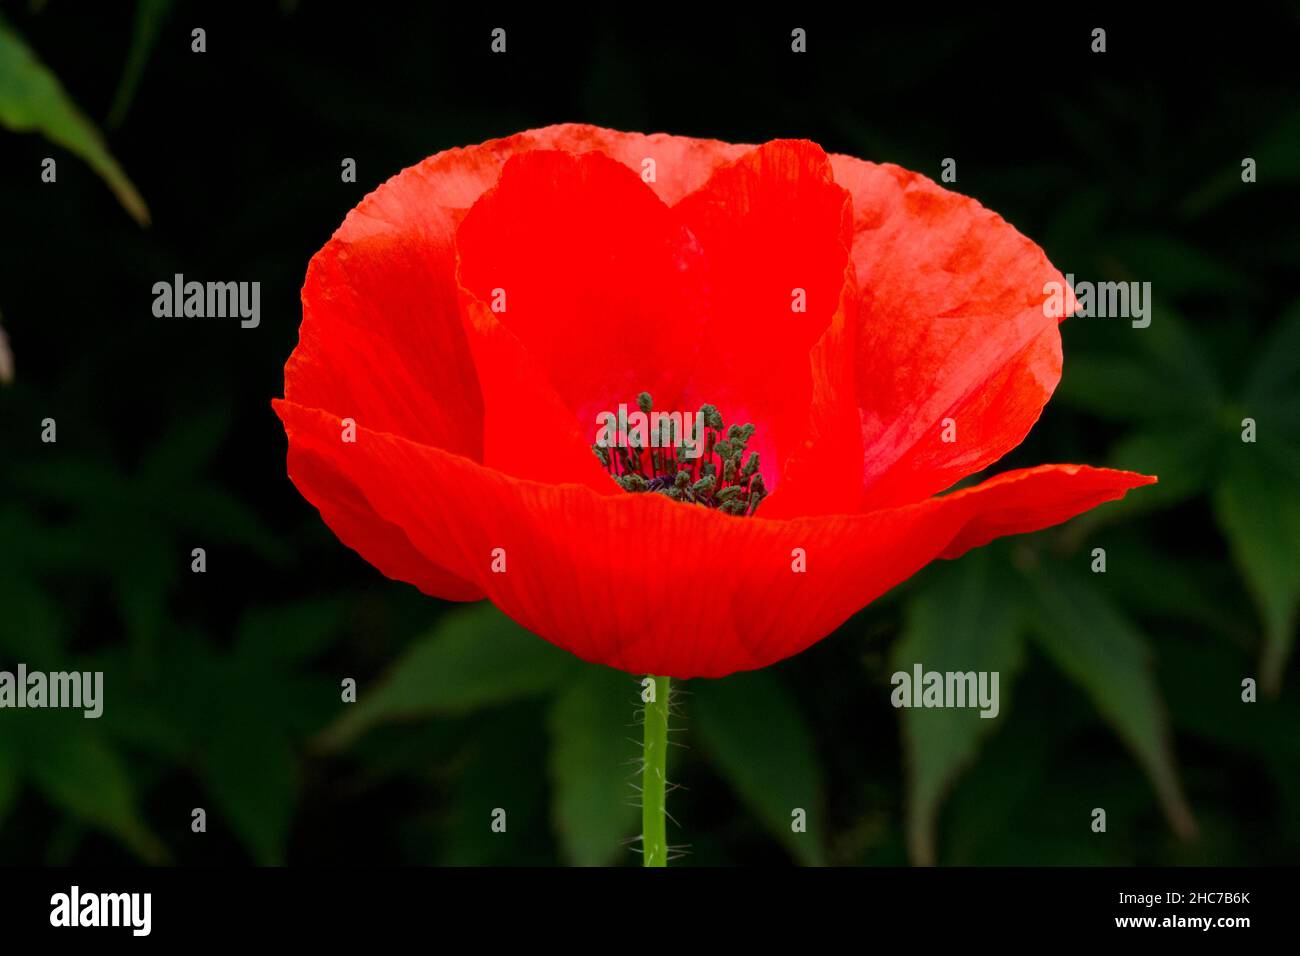 A single red poppy (papaver rhoeas) in full bloom in a garden in Nanaimo, Vancouver Island, BC, Canada in July Stock Photo